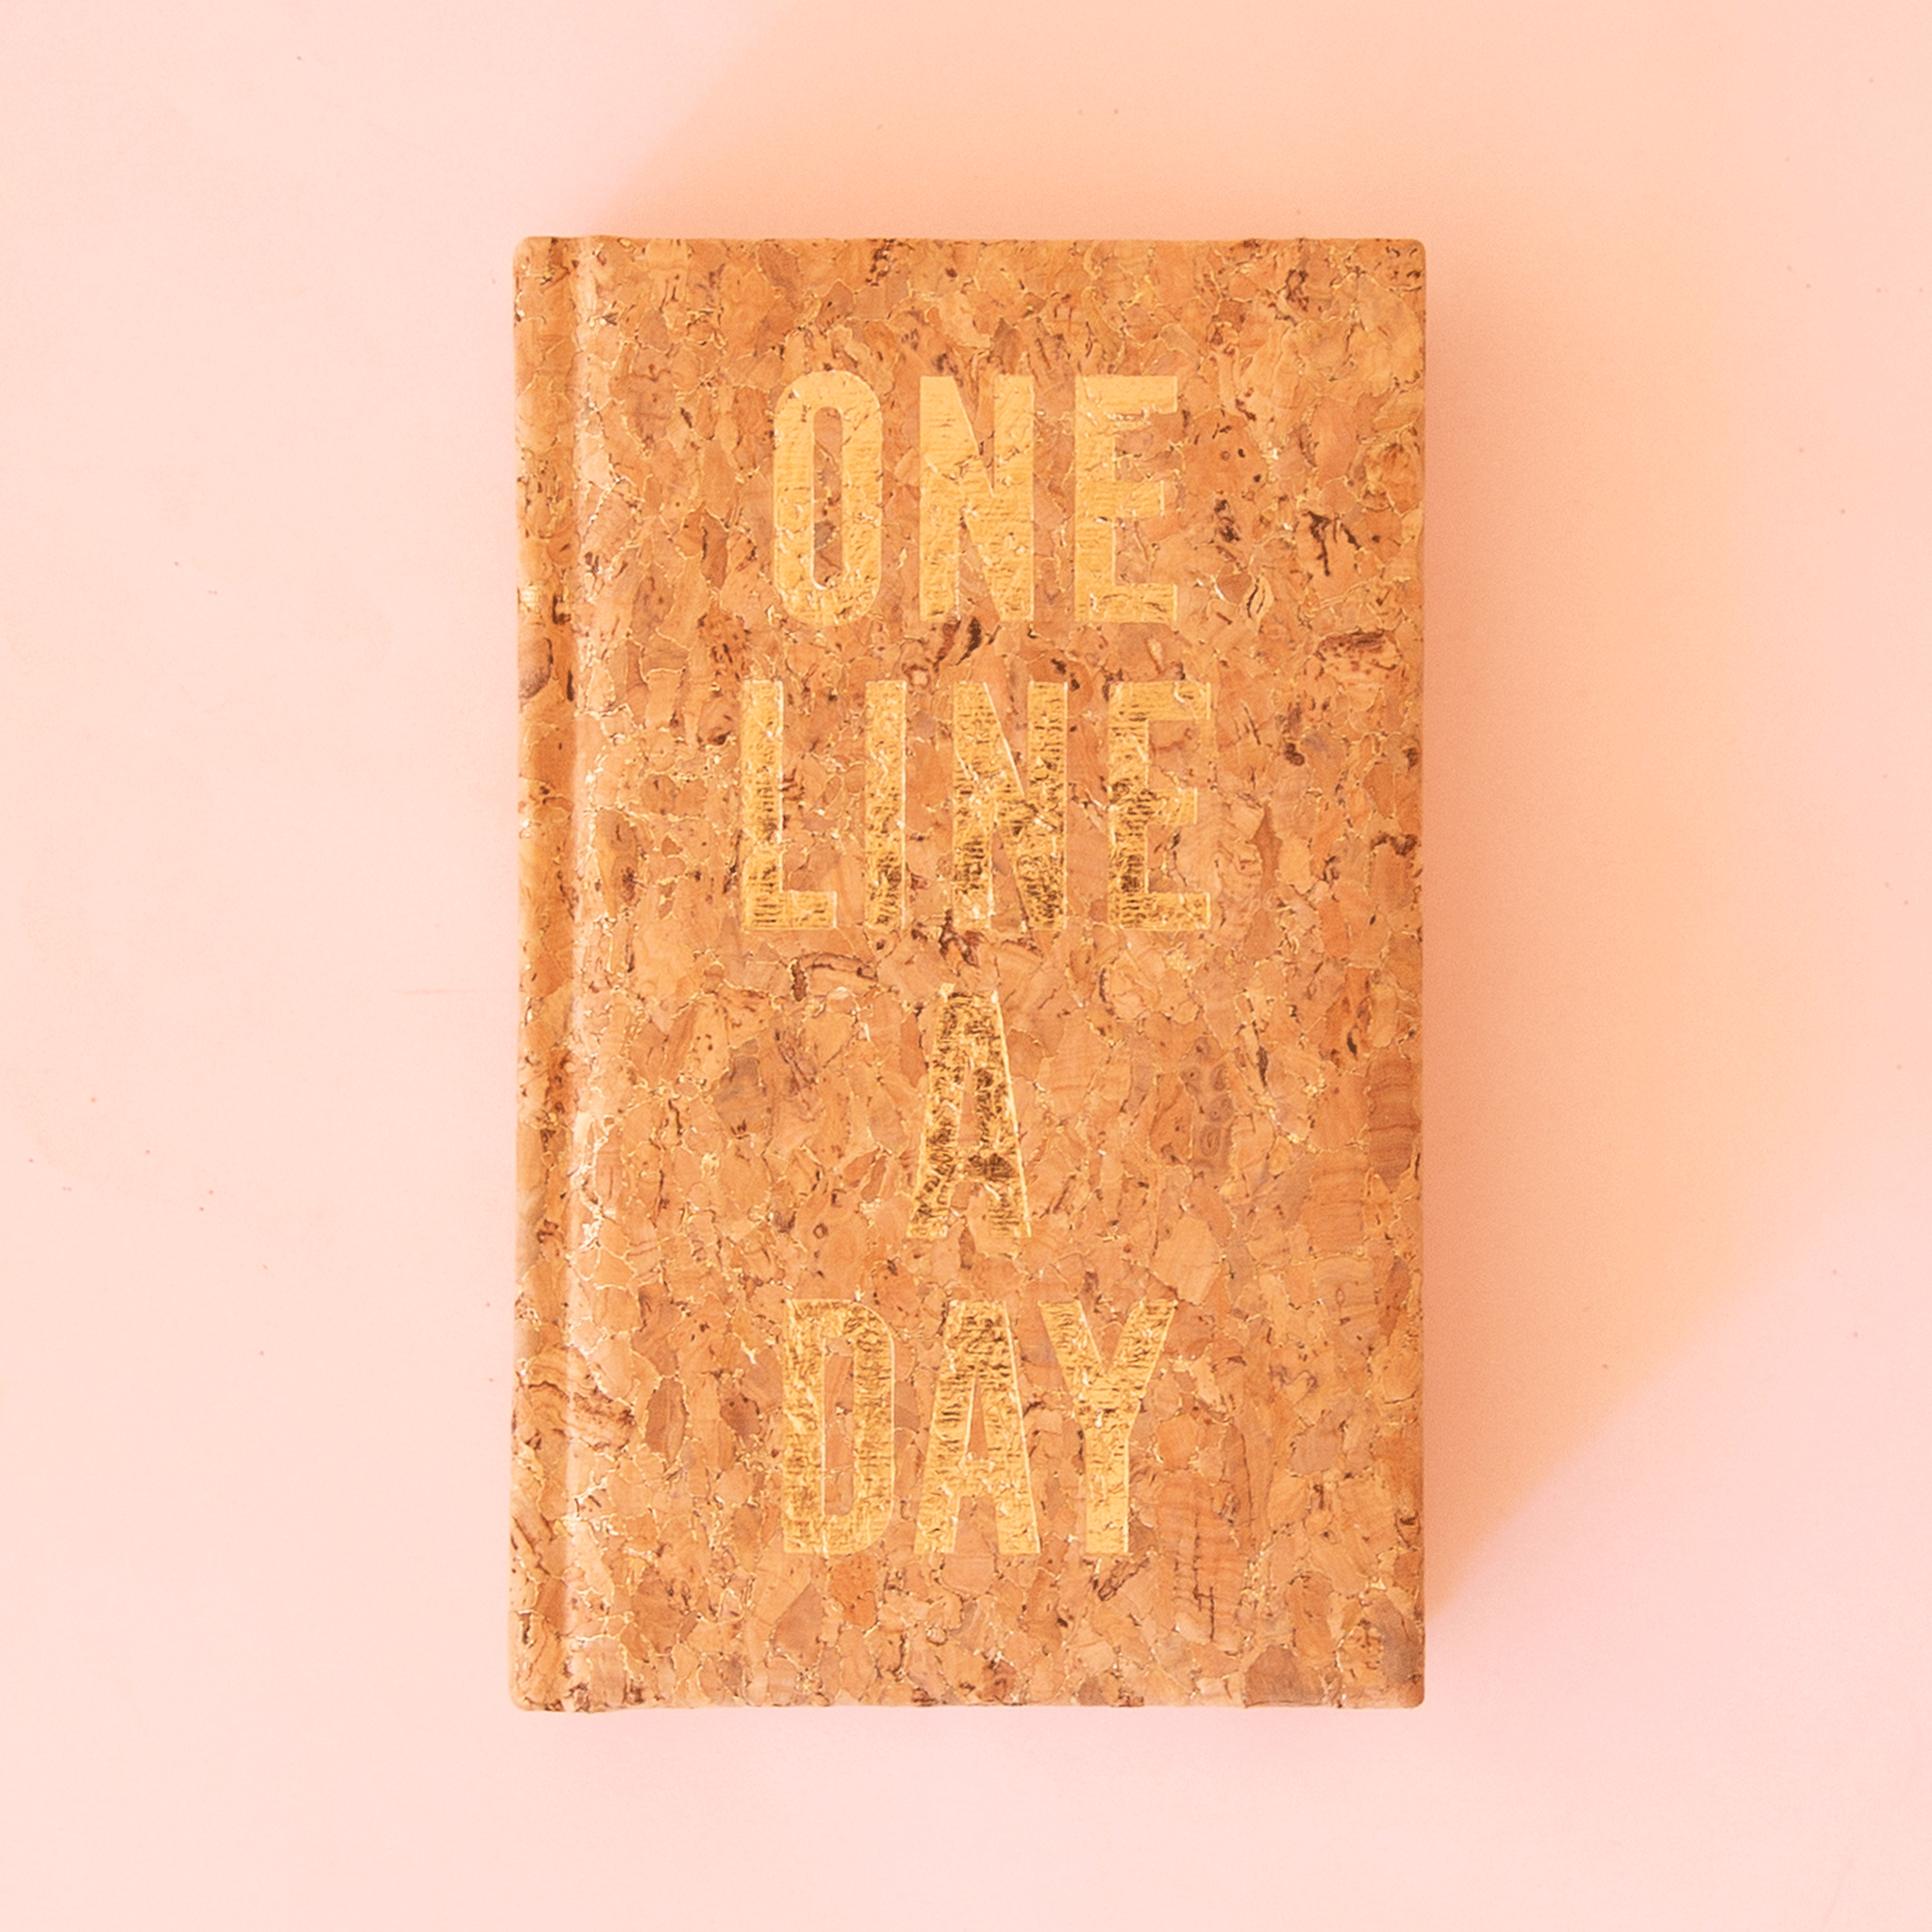 On a neutral background is a cork textured journal with gold text on the front that reads, "One Line A Day".